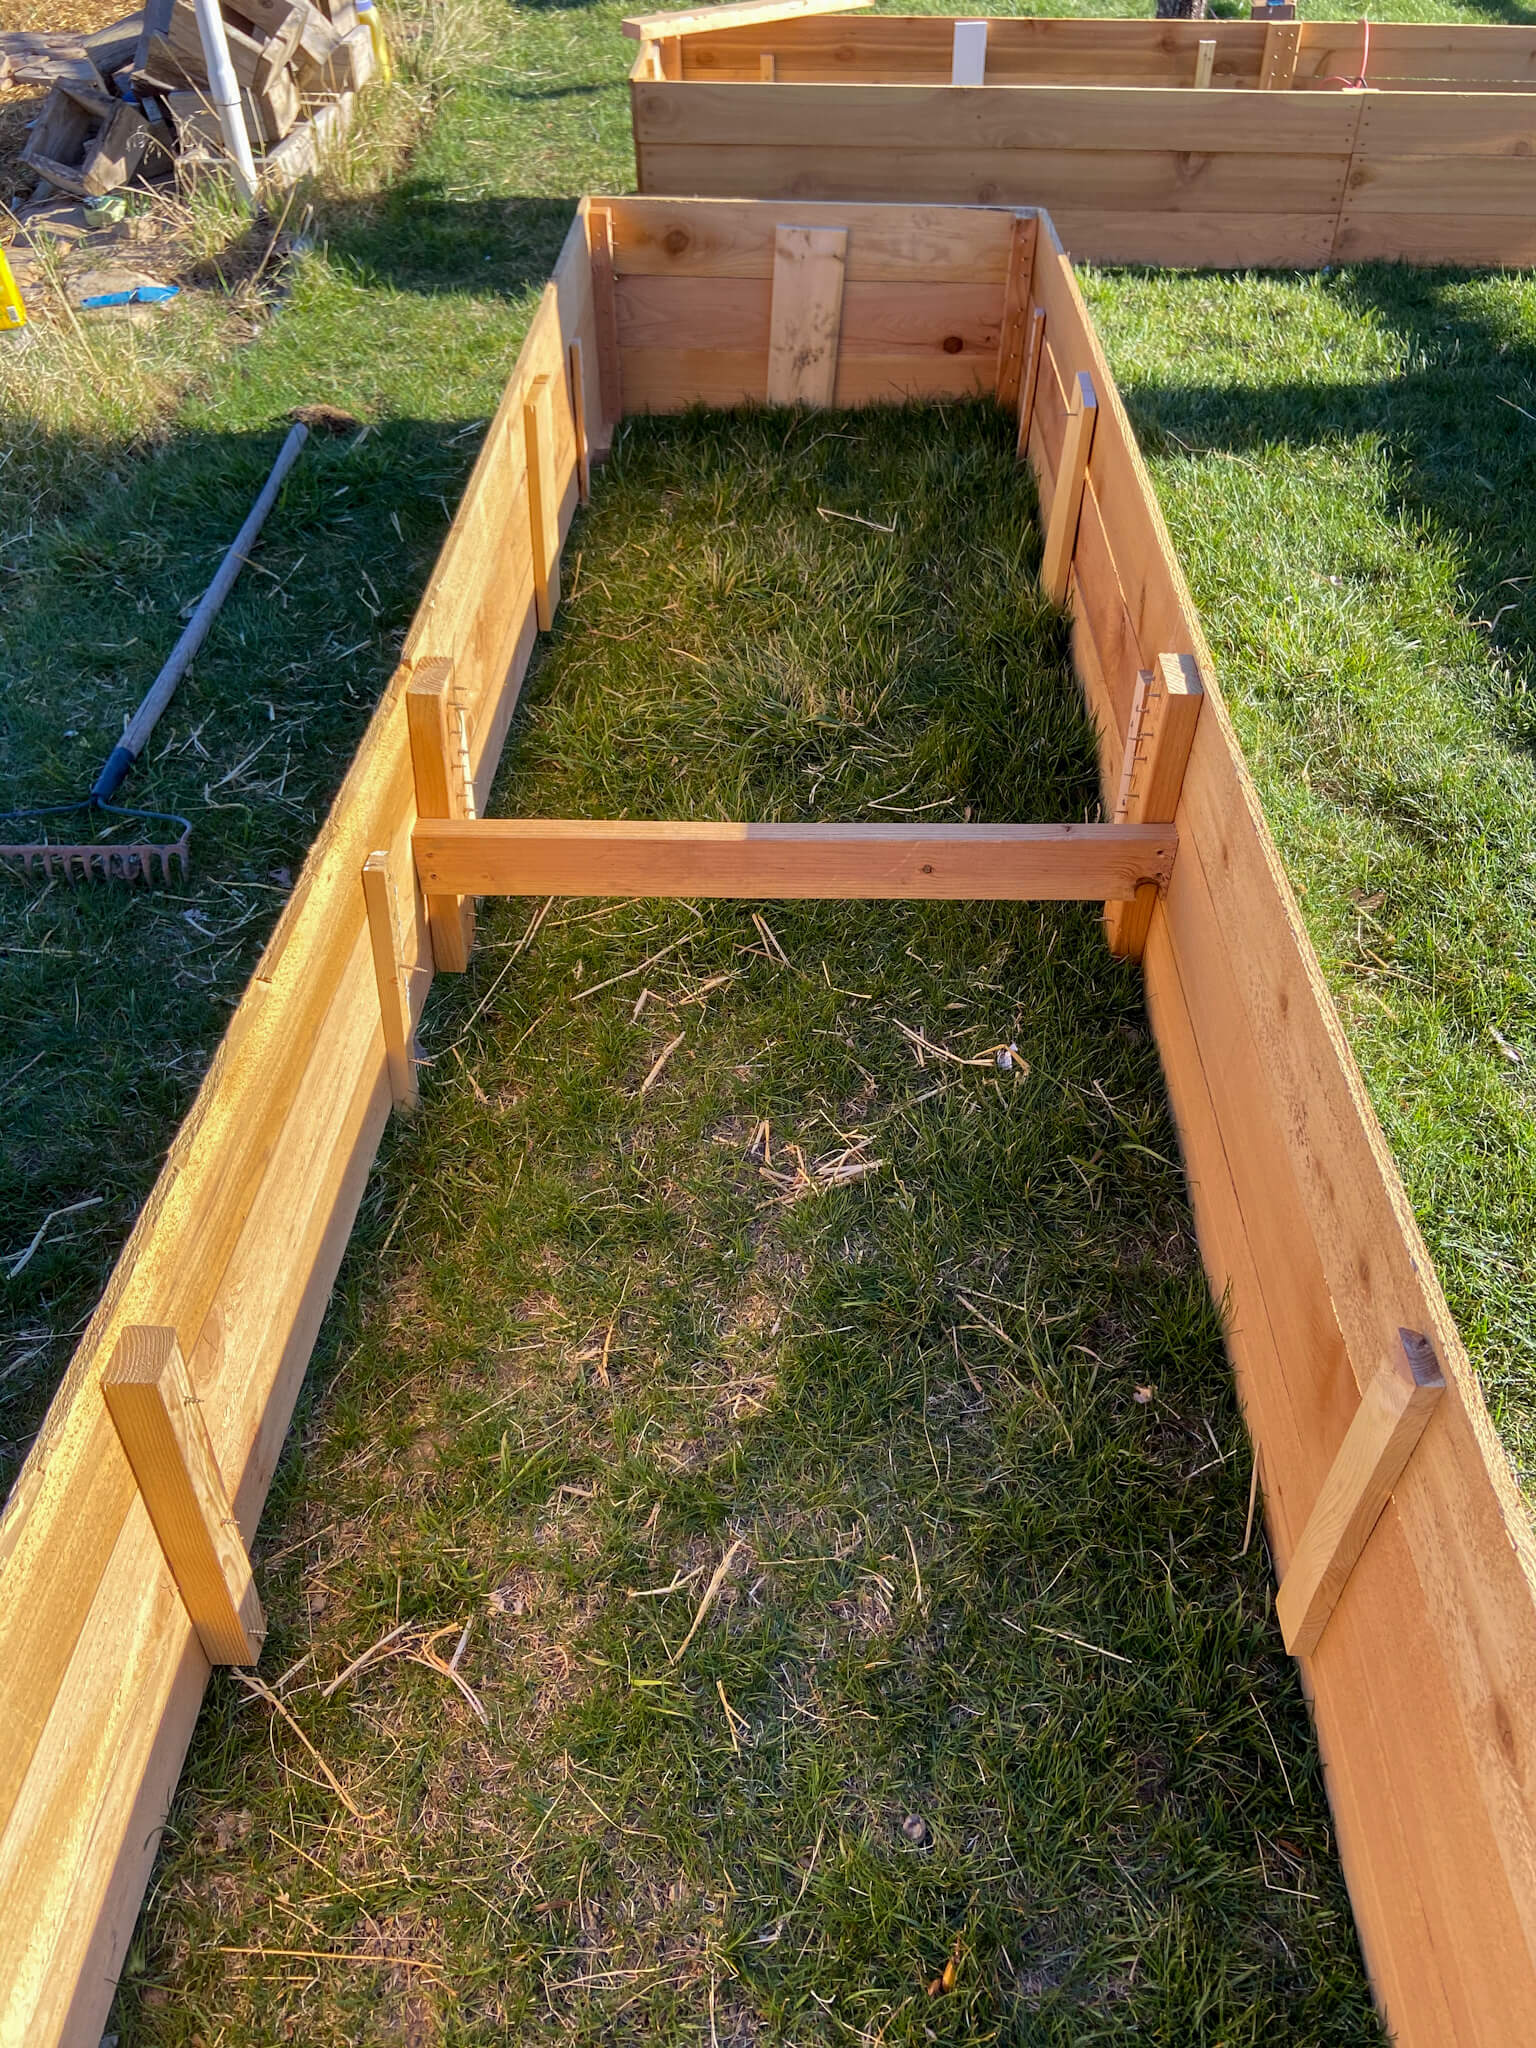 How to make your own affordable rot resistant cedar raised planter boxes to us in your garden, on your patio or other small space.